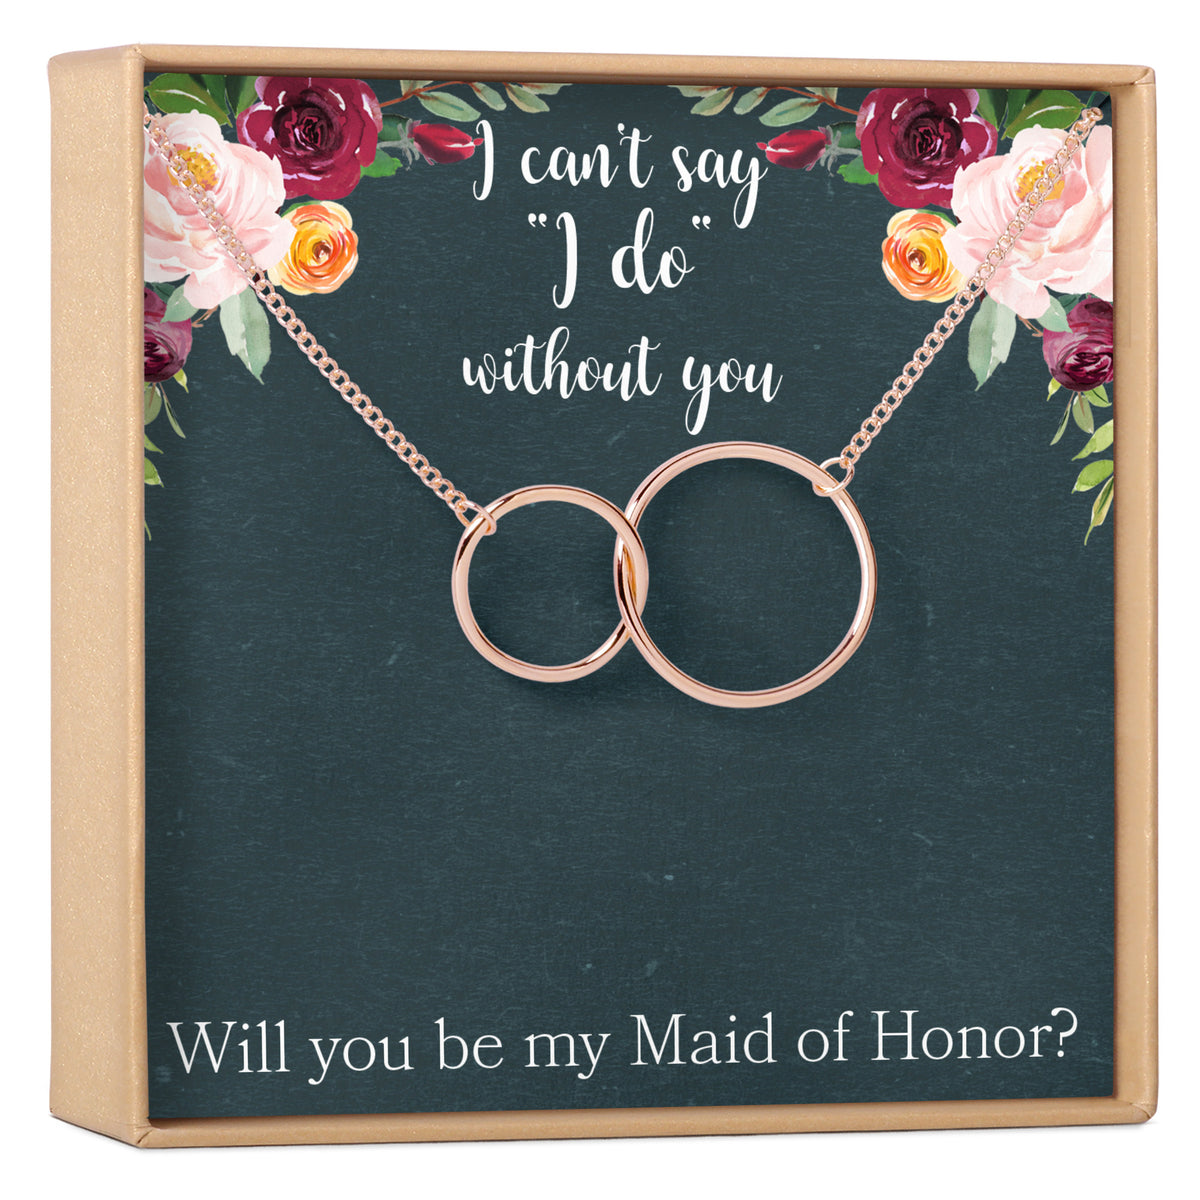 Maid of Honor Necklace - Dear Ava, Jewelry / Necklaces / Pendants